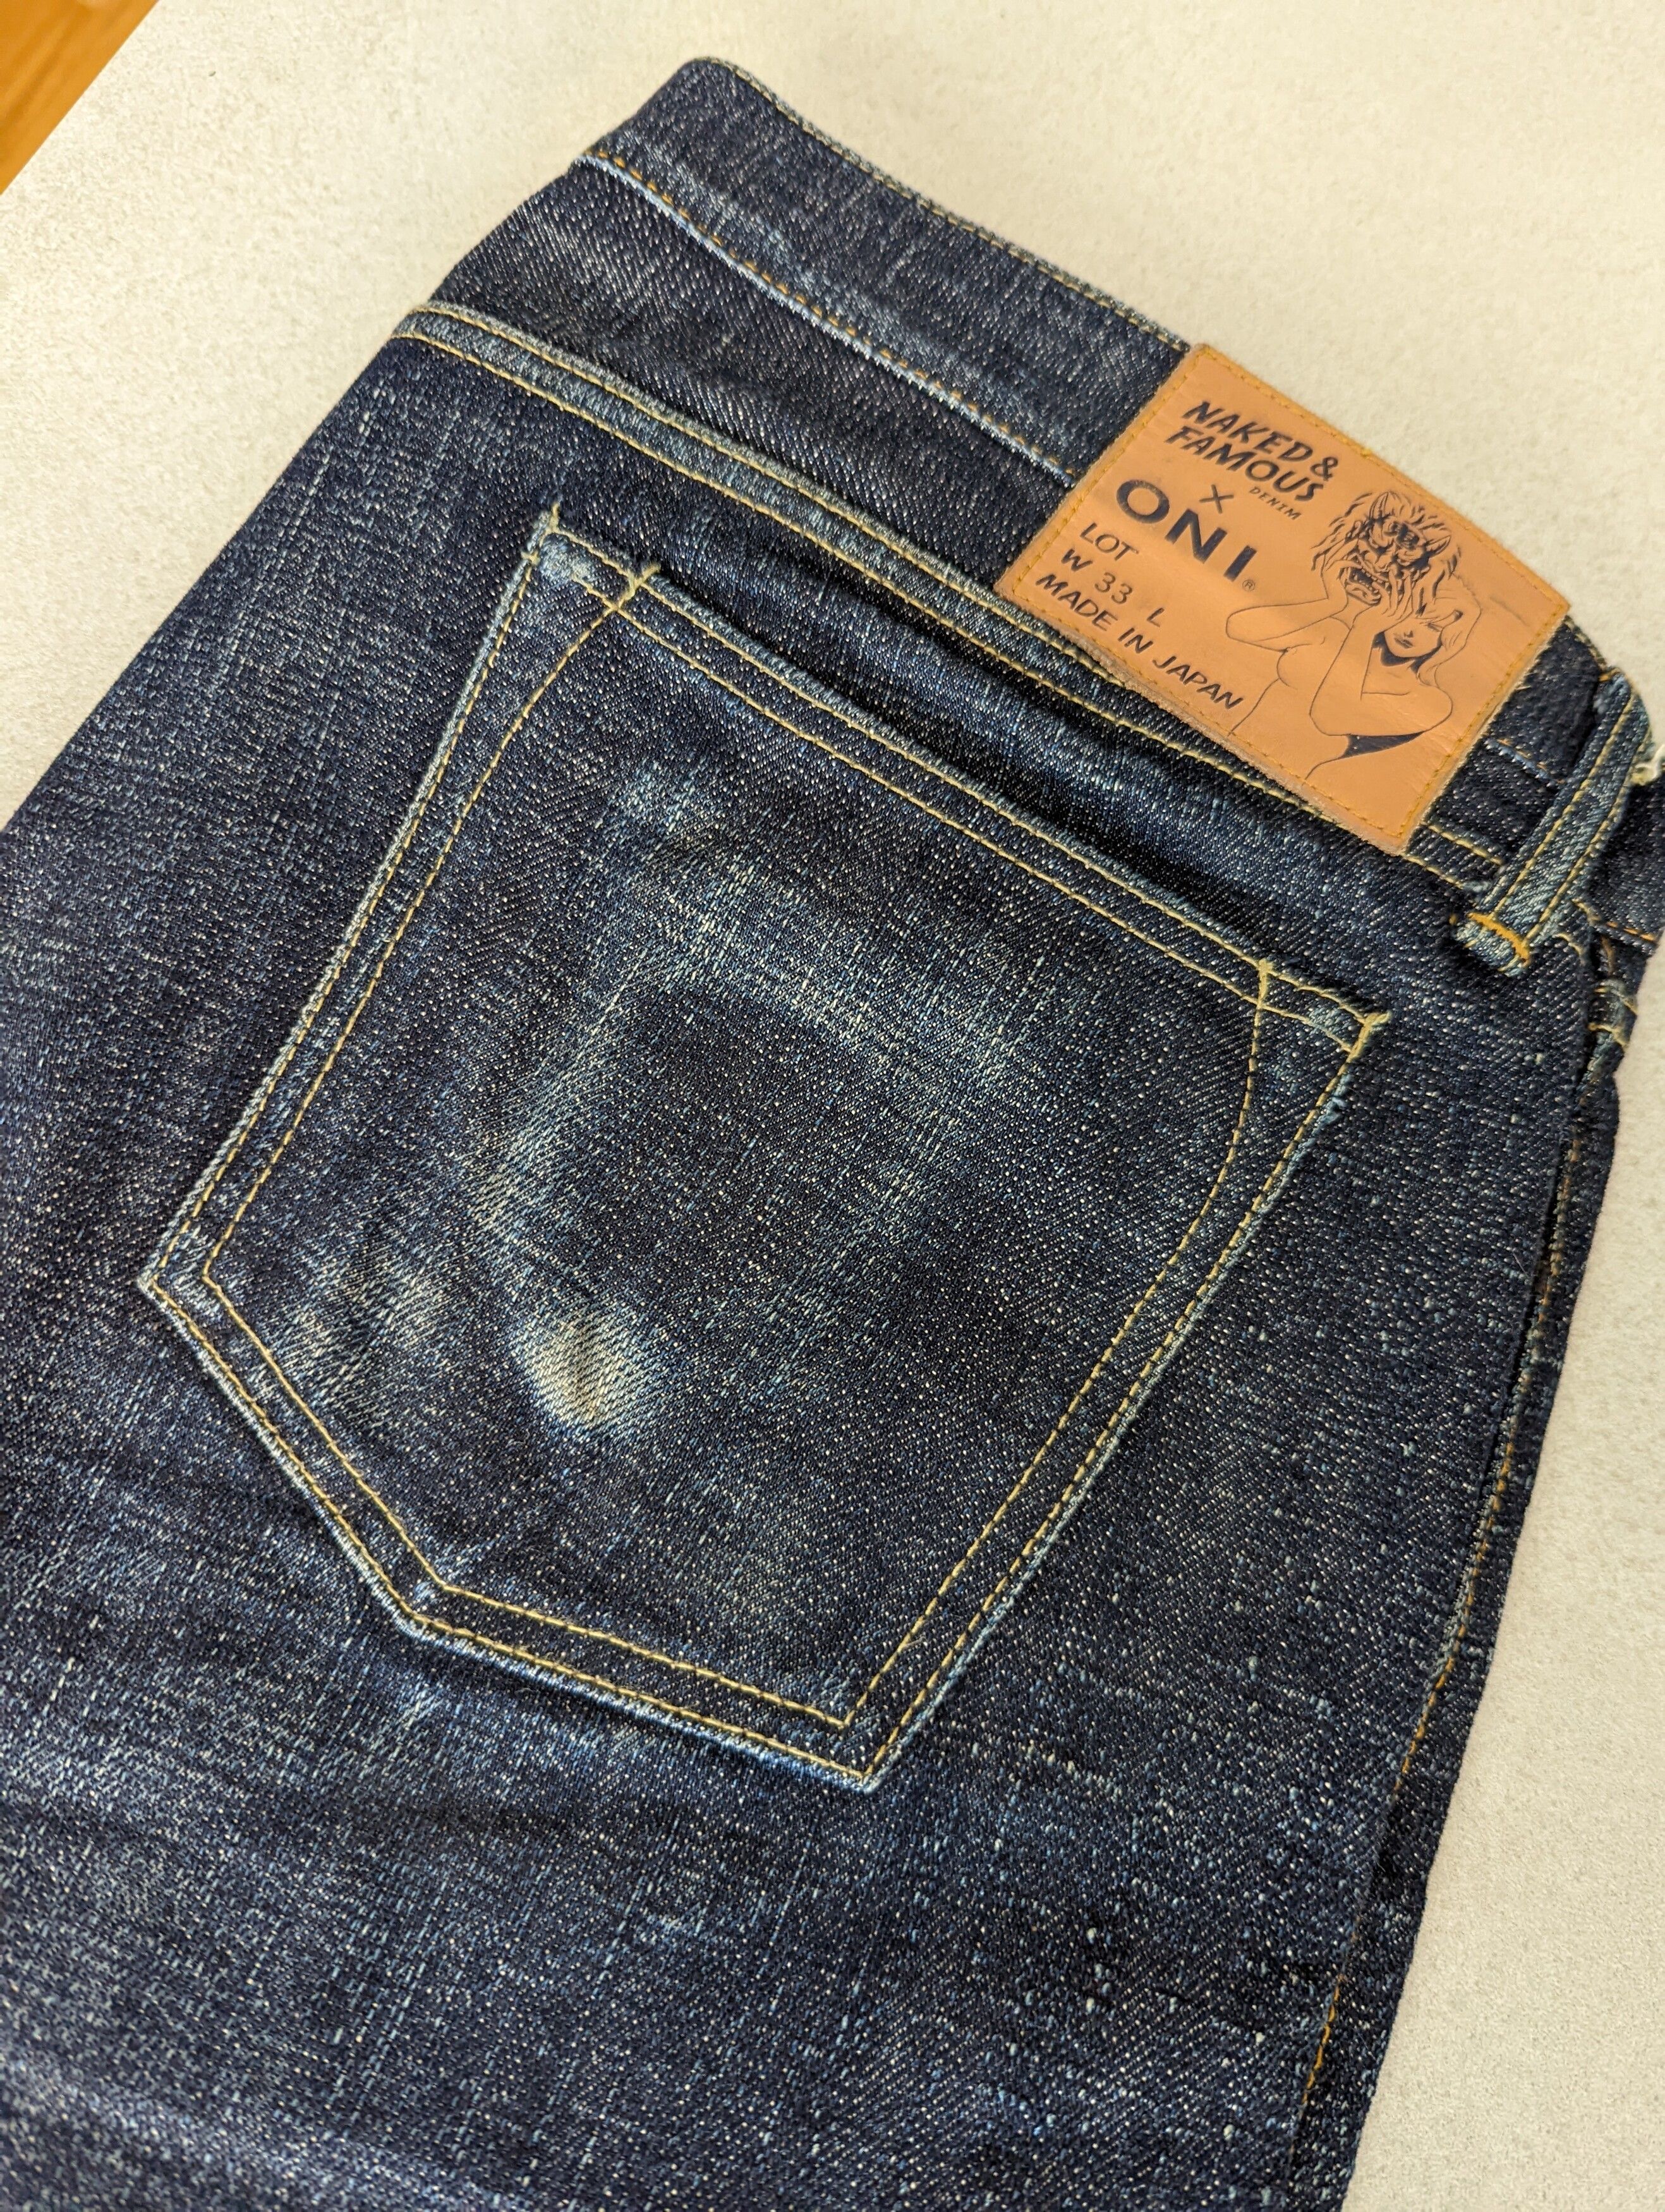 Naked & Famous RARE Naked & Famous x Oni Weird Guy Slubby Denim Size 33 Size US 33 - 2 Preview